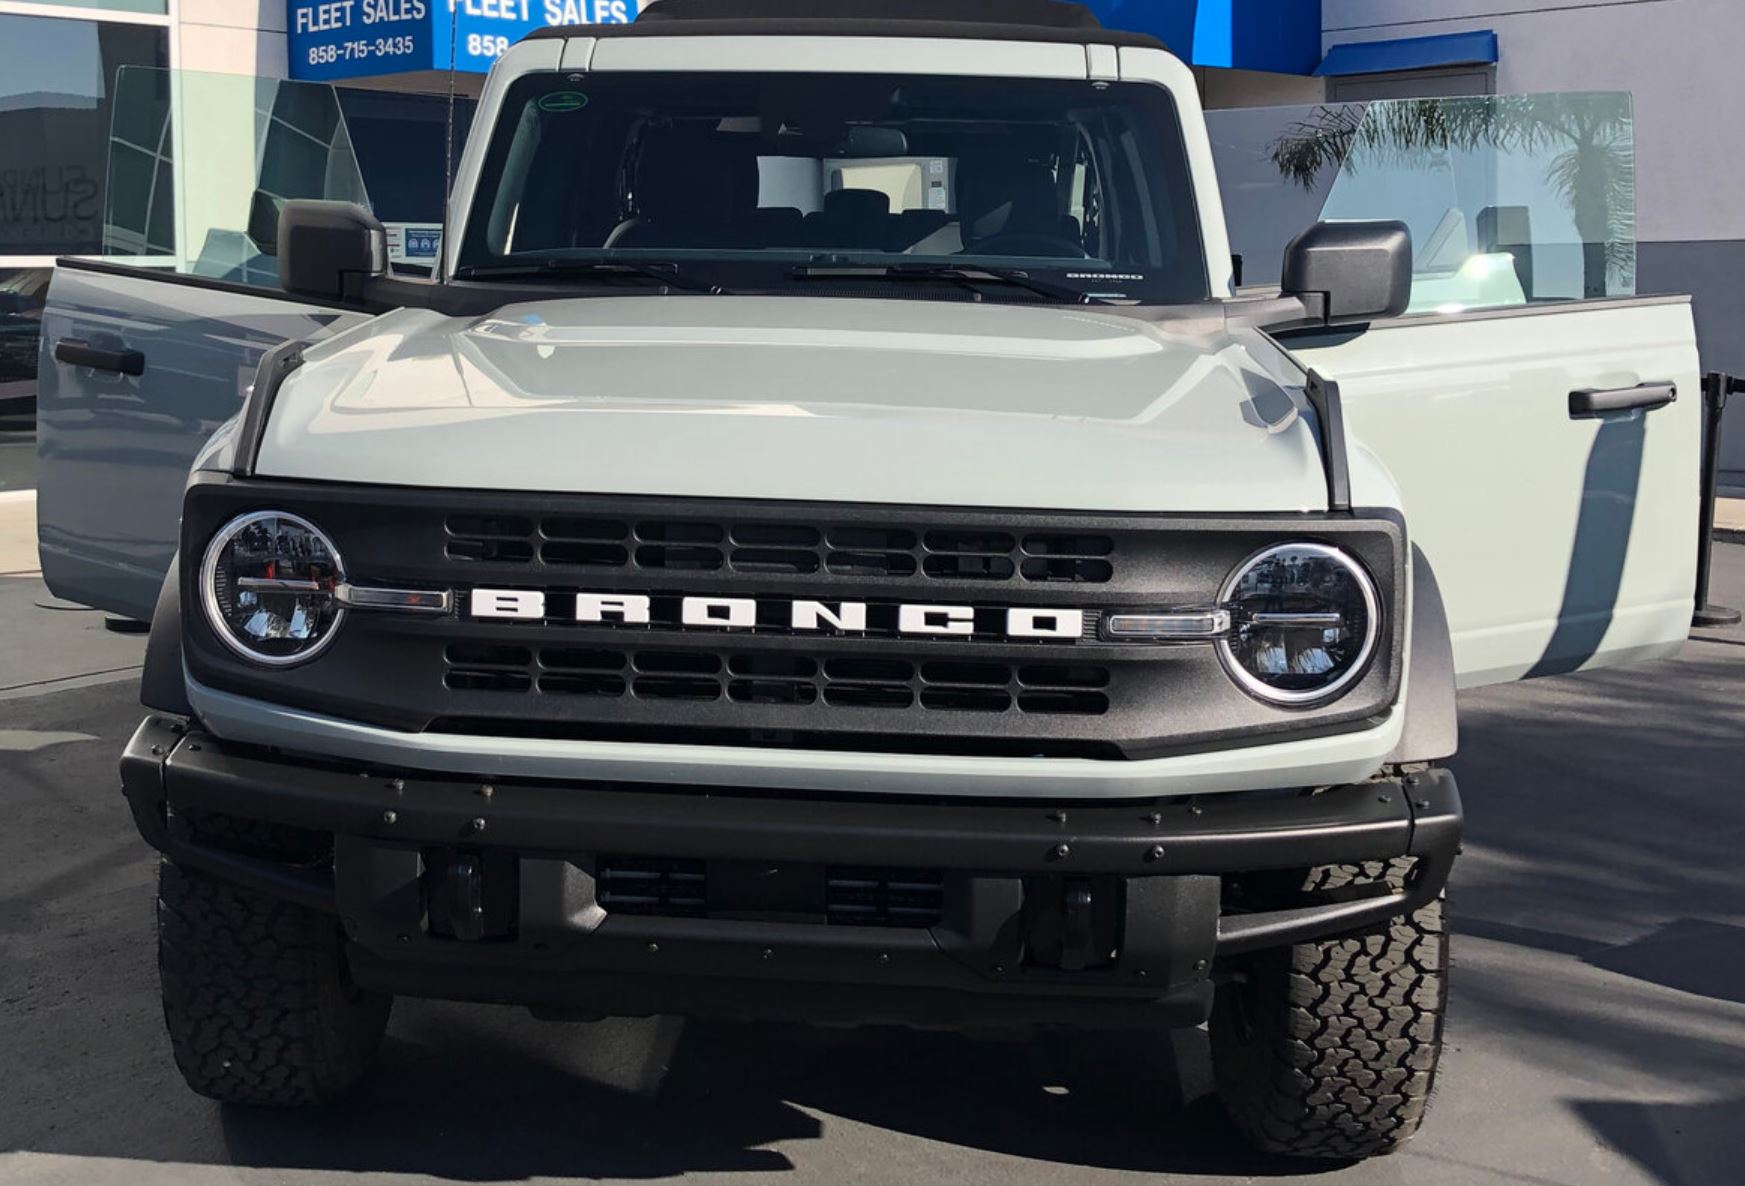 Ford Bronco Bronco Event at Kearny Mesa Ford: Initial Impressions rr5.JPG